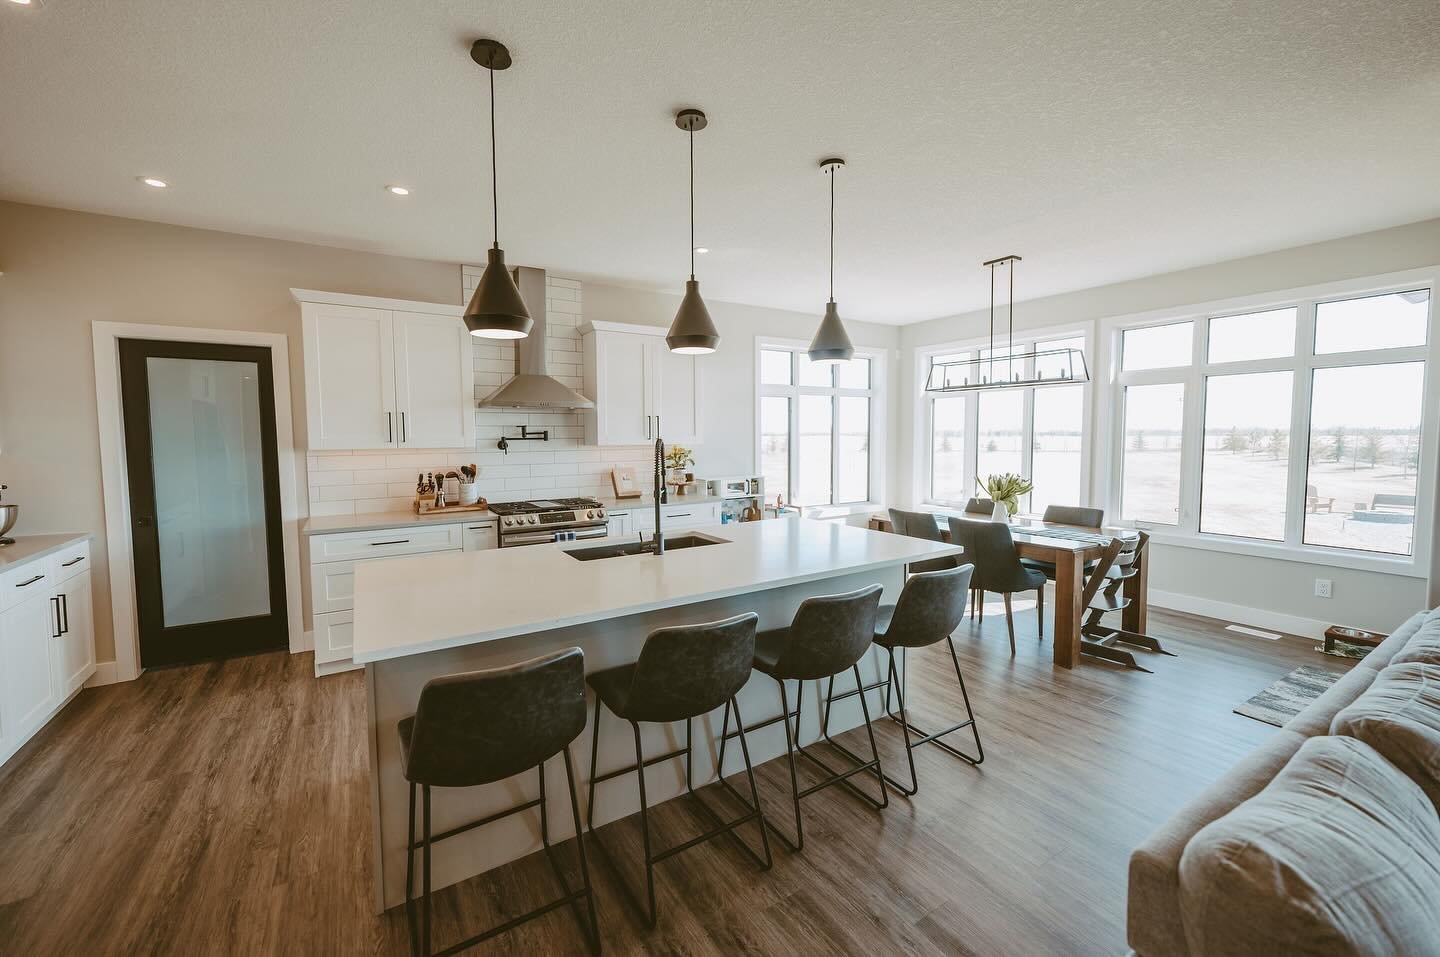 Not to brag, but our kitchens are so beautiful, they make other rooms jealous. 

Contact Cody today to start planning your new kitchen whether it&rsquo;s a renovation or a custom build!
📱: 780.668.9911
✉️: info@dansoncustomhomes.com
💻: www.dansoncu